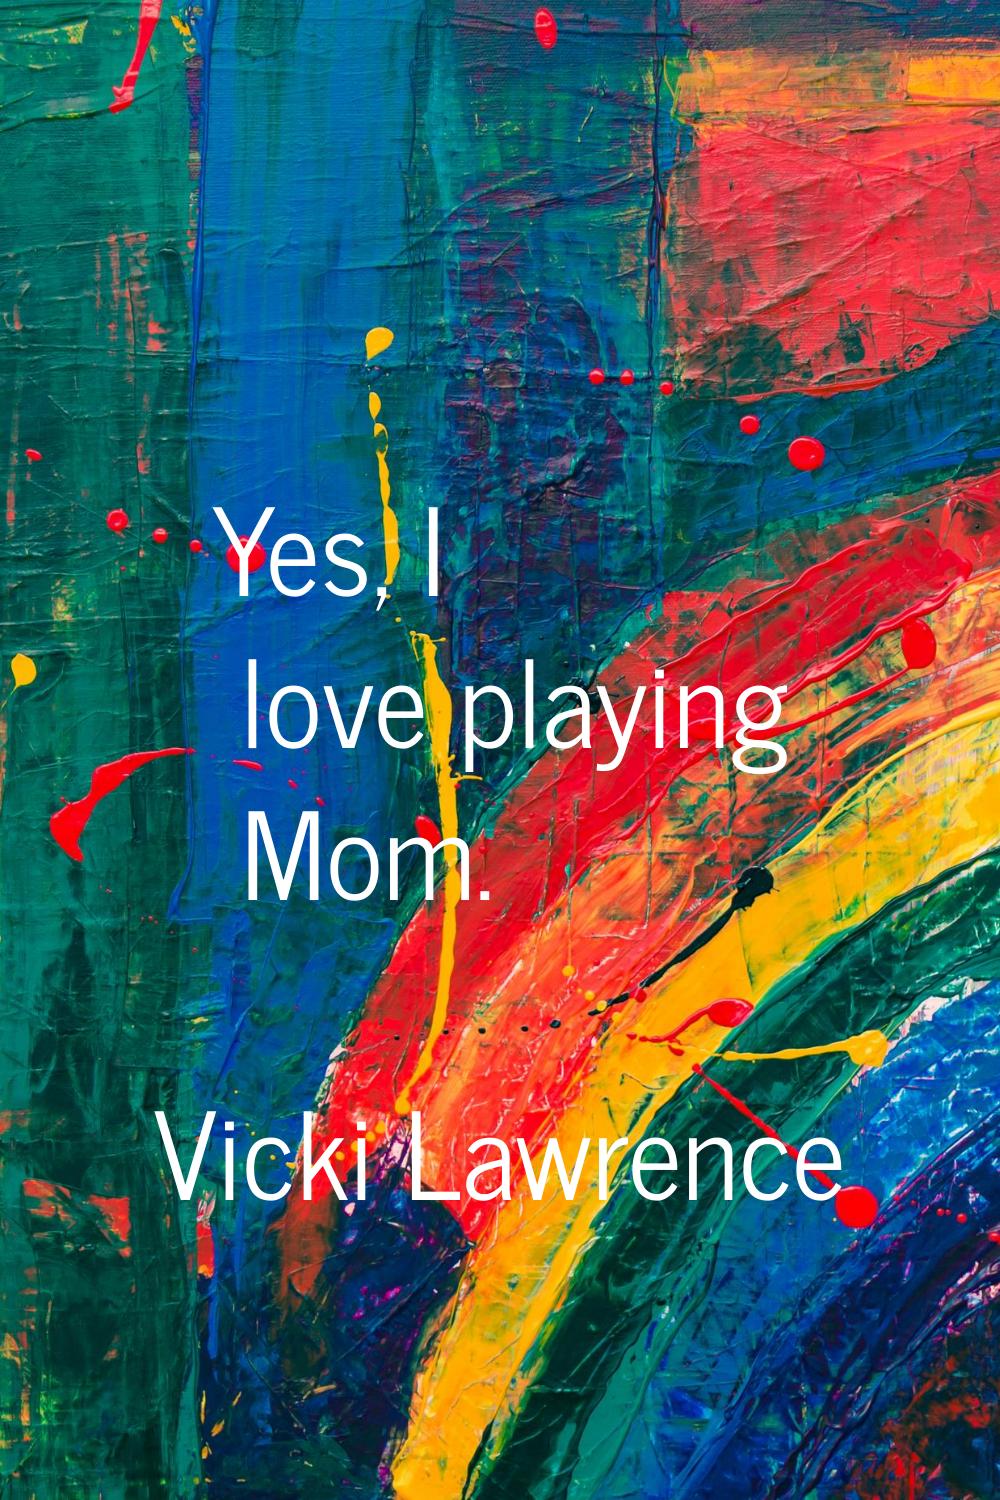 Yes, I love playing Mom.